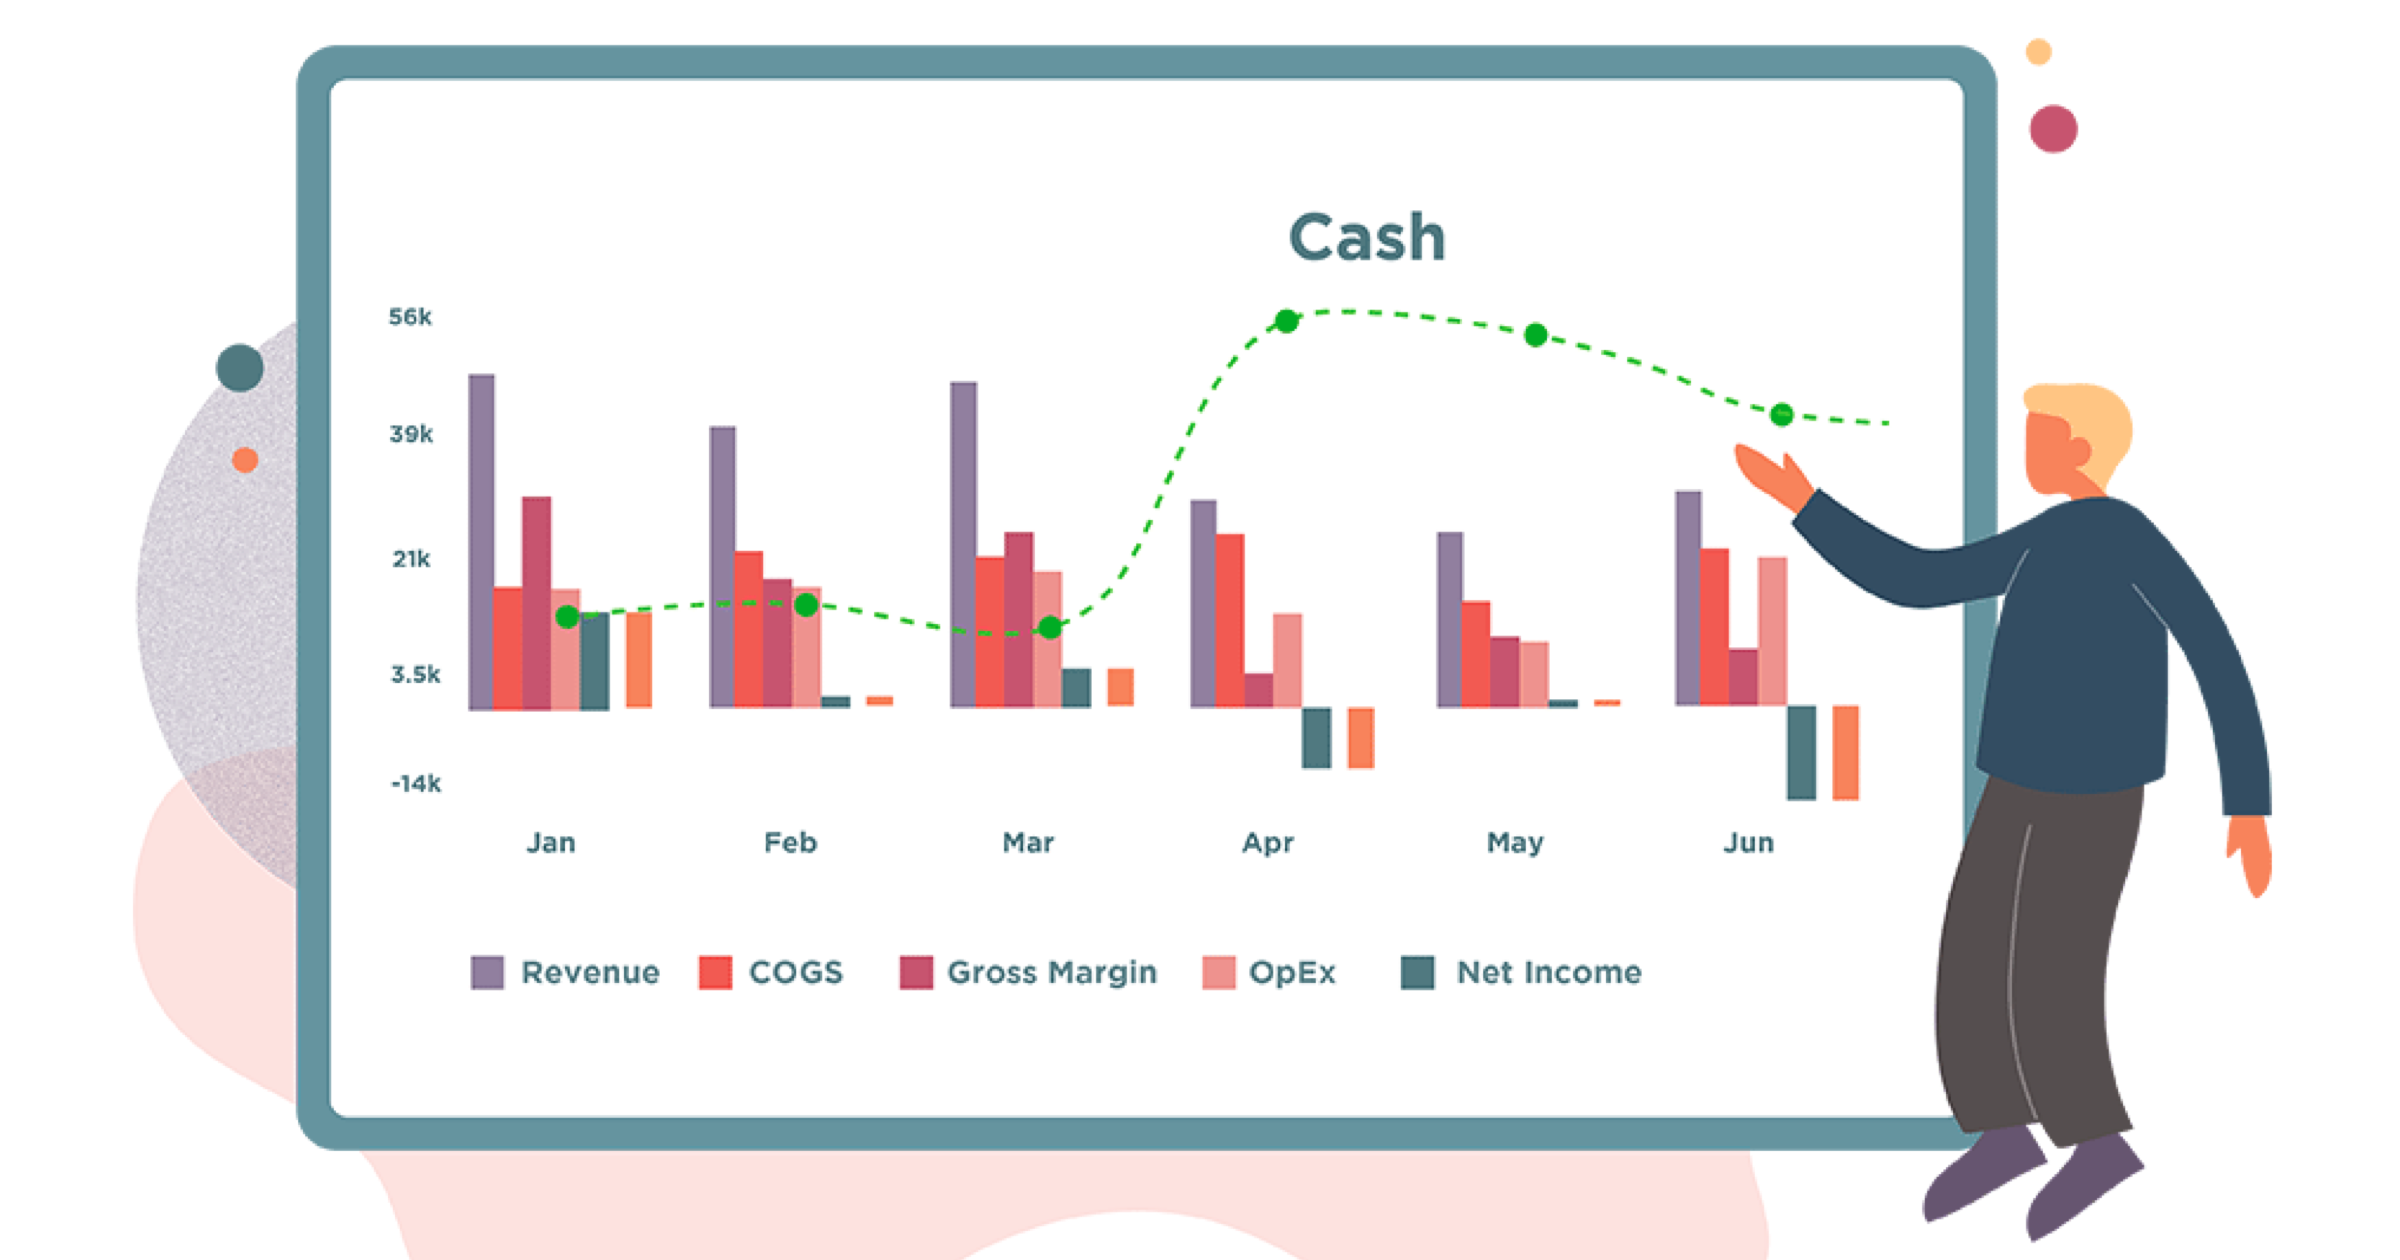 personal finance software with cash flow forecast